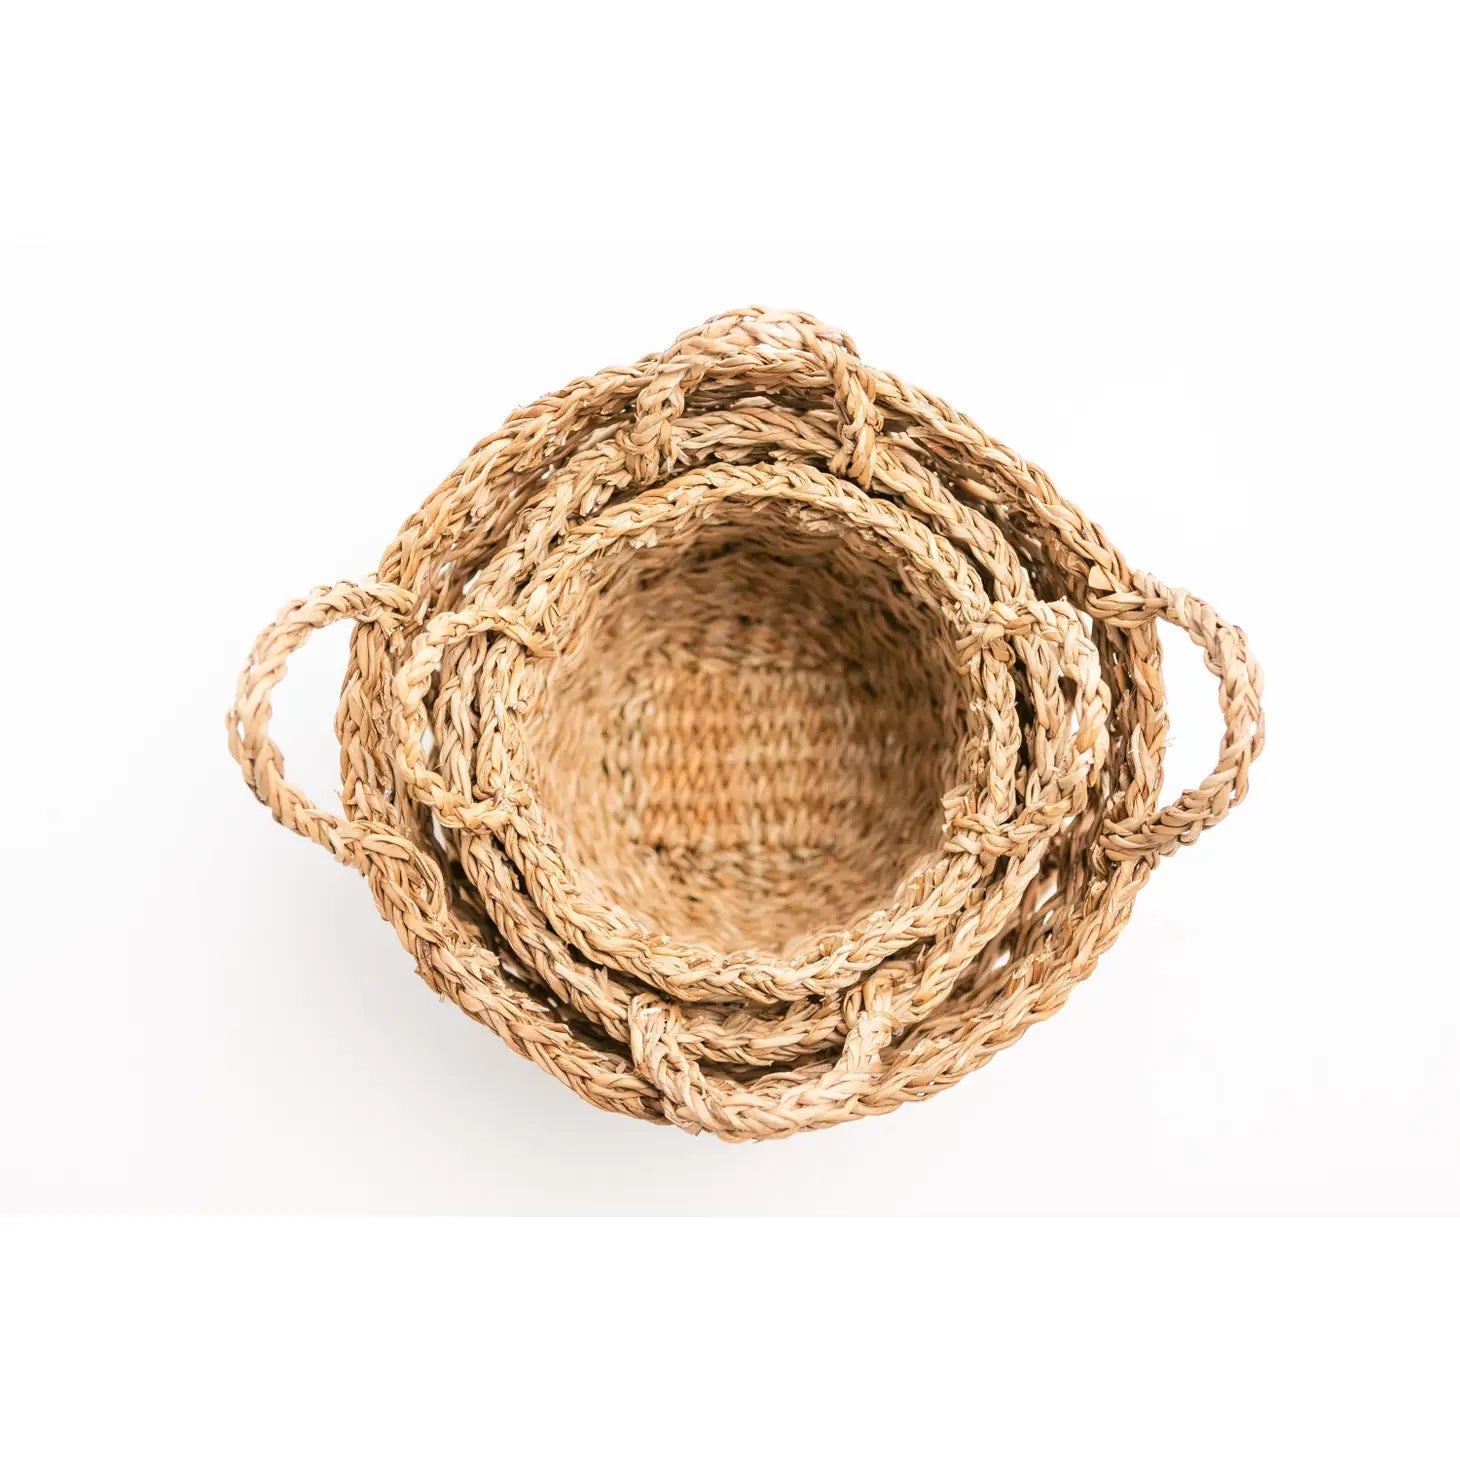 Hogla Cutout Basket-Large - Sold Individually (*Local Pickup/Local Delivery Only)